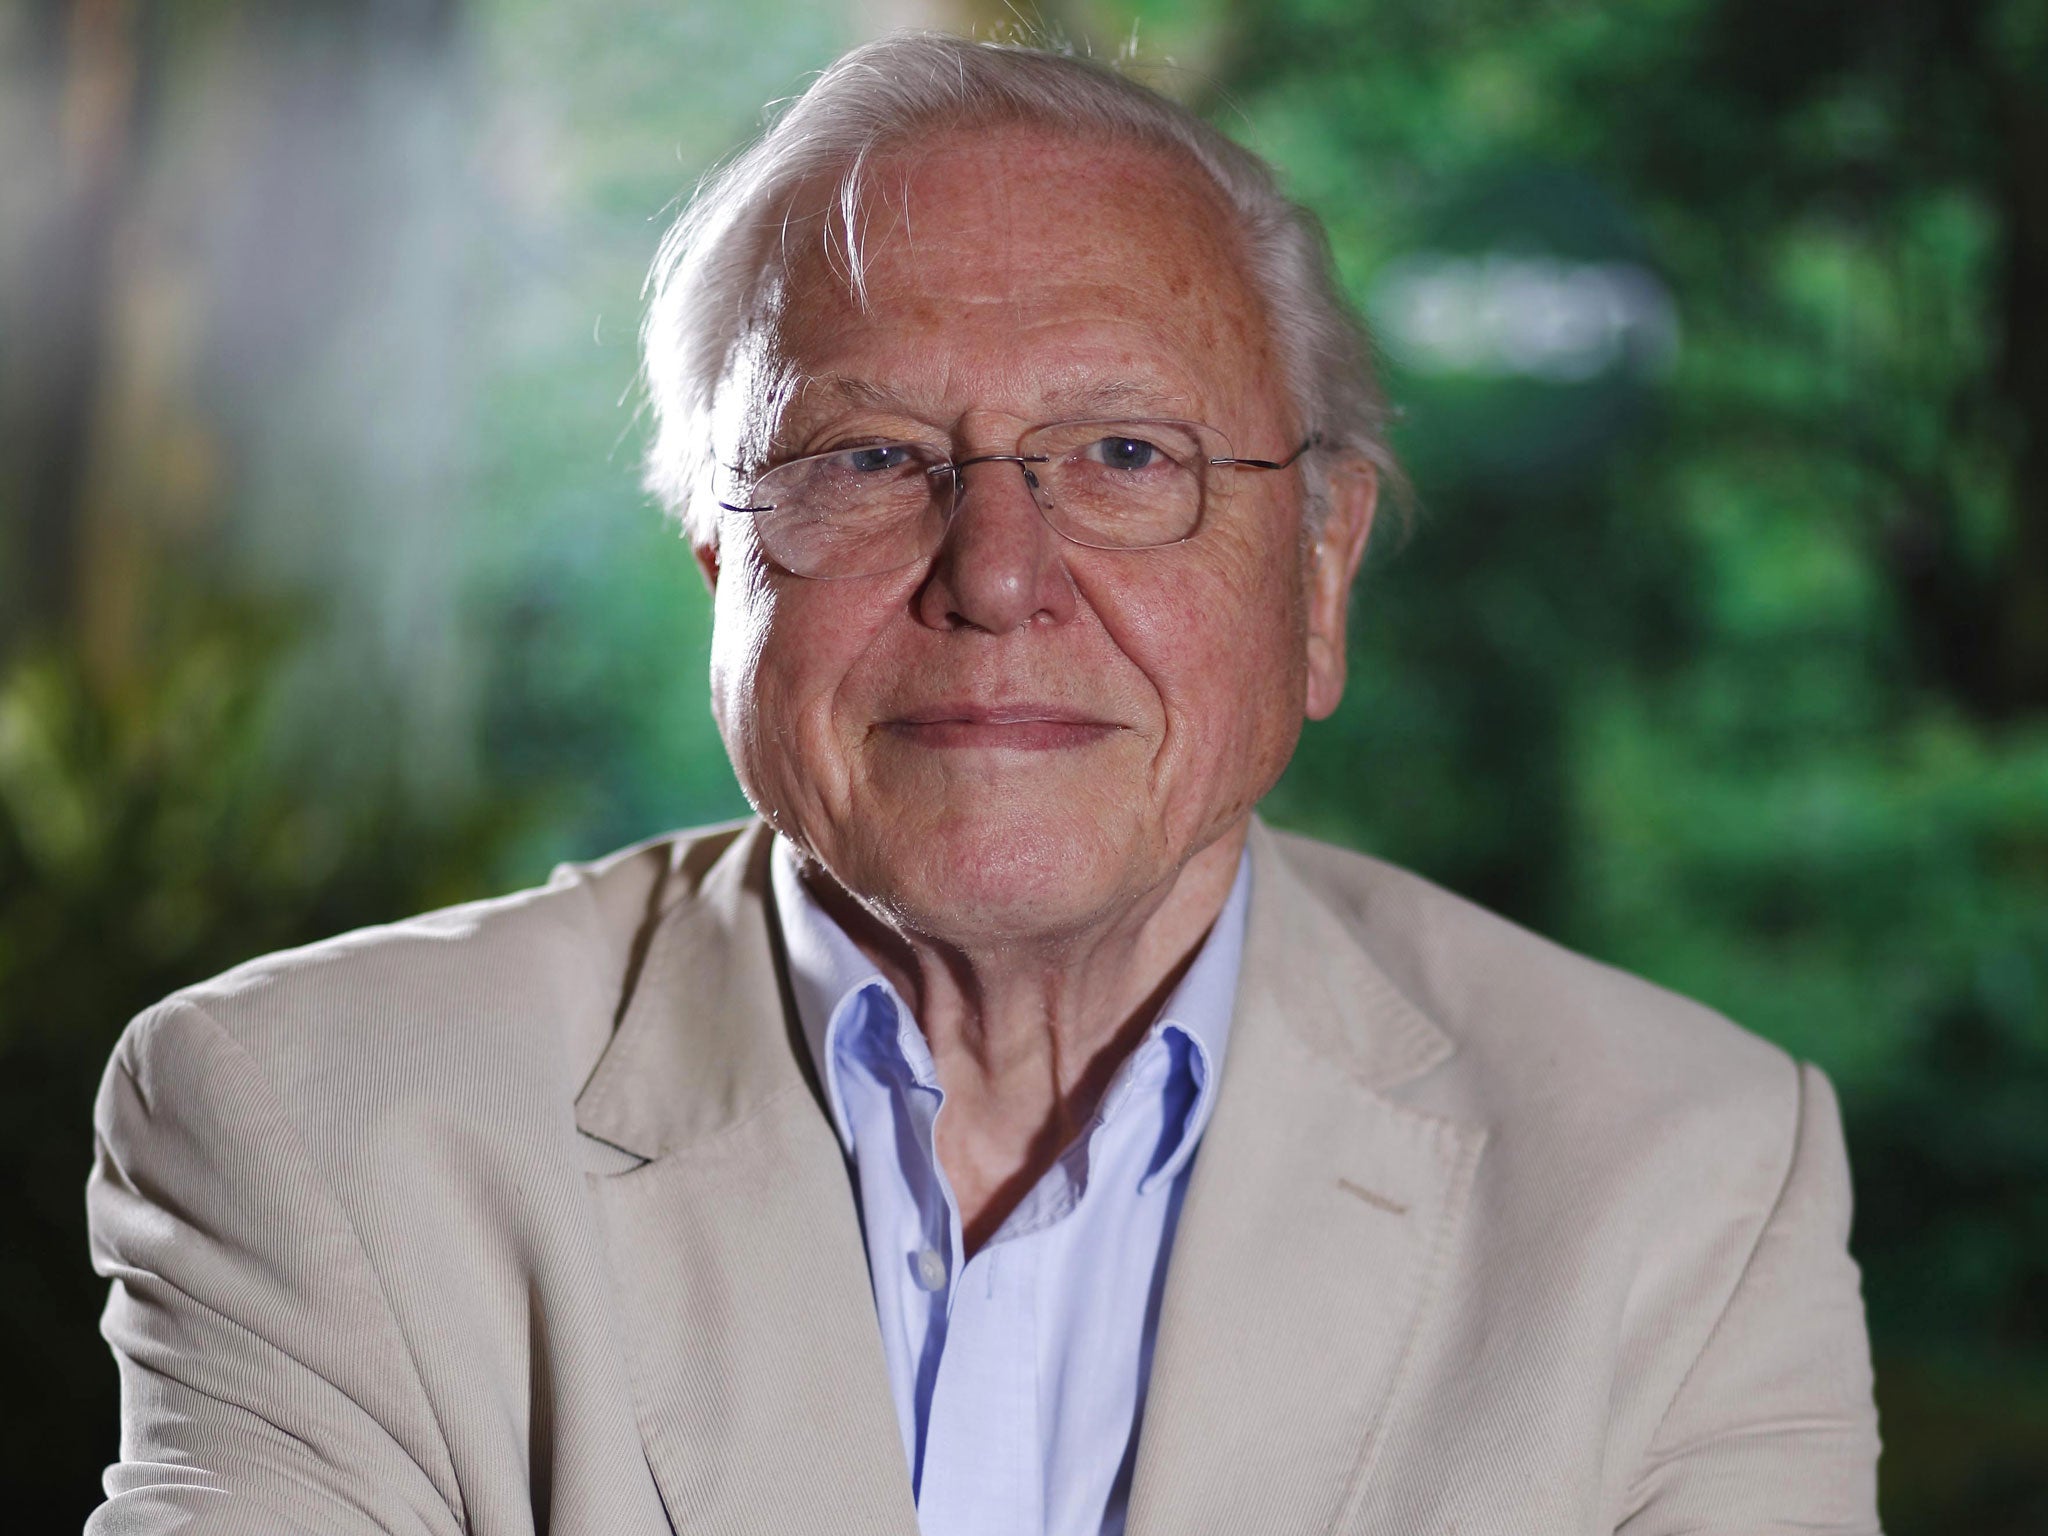 David Attenborough narrated Africa, but China Central Television was also a key contributor